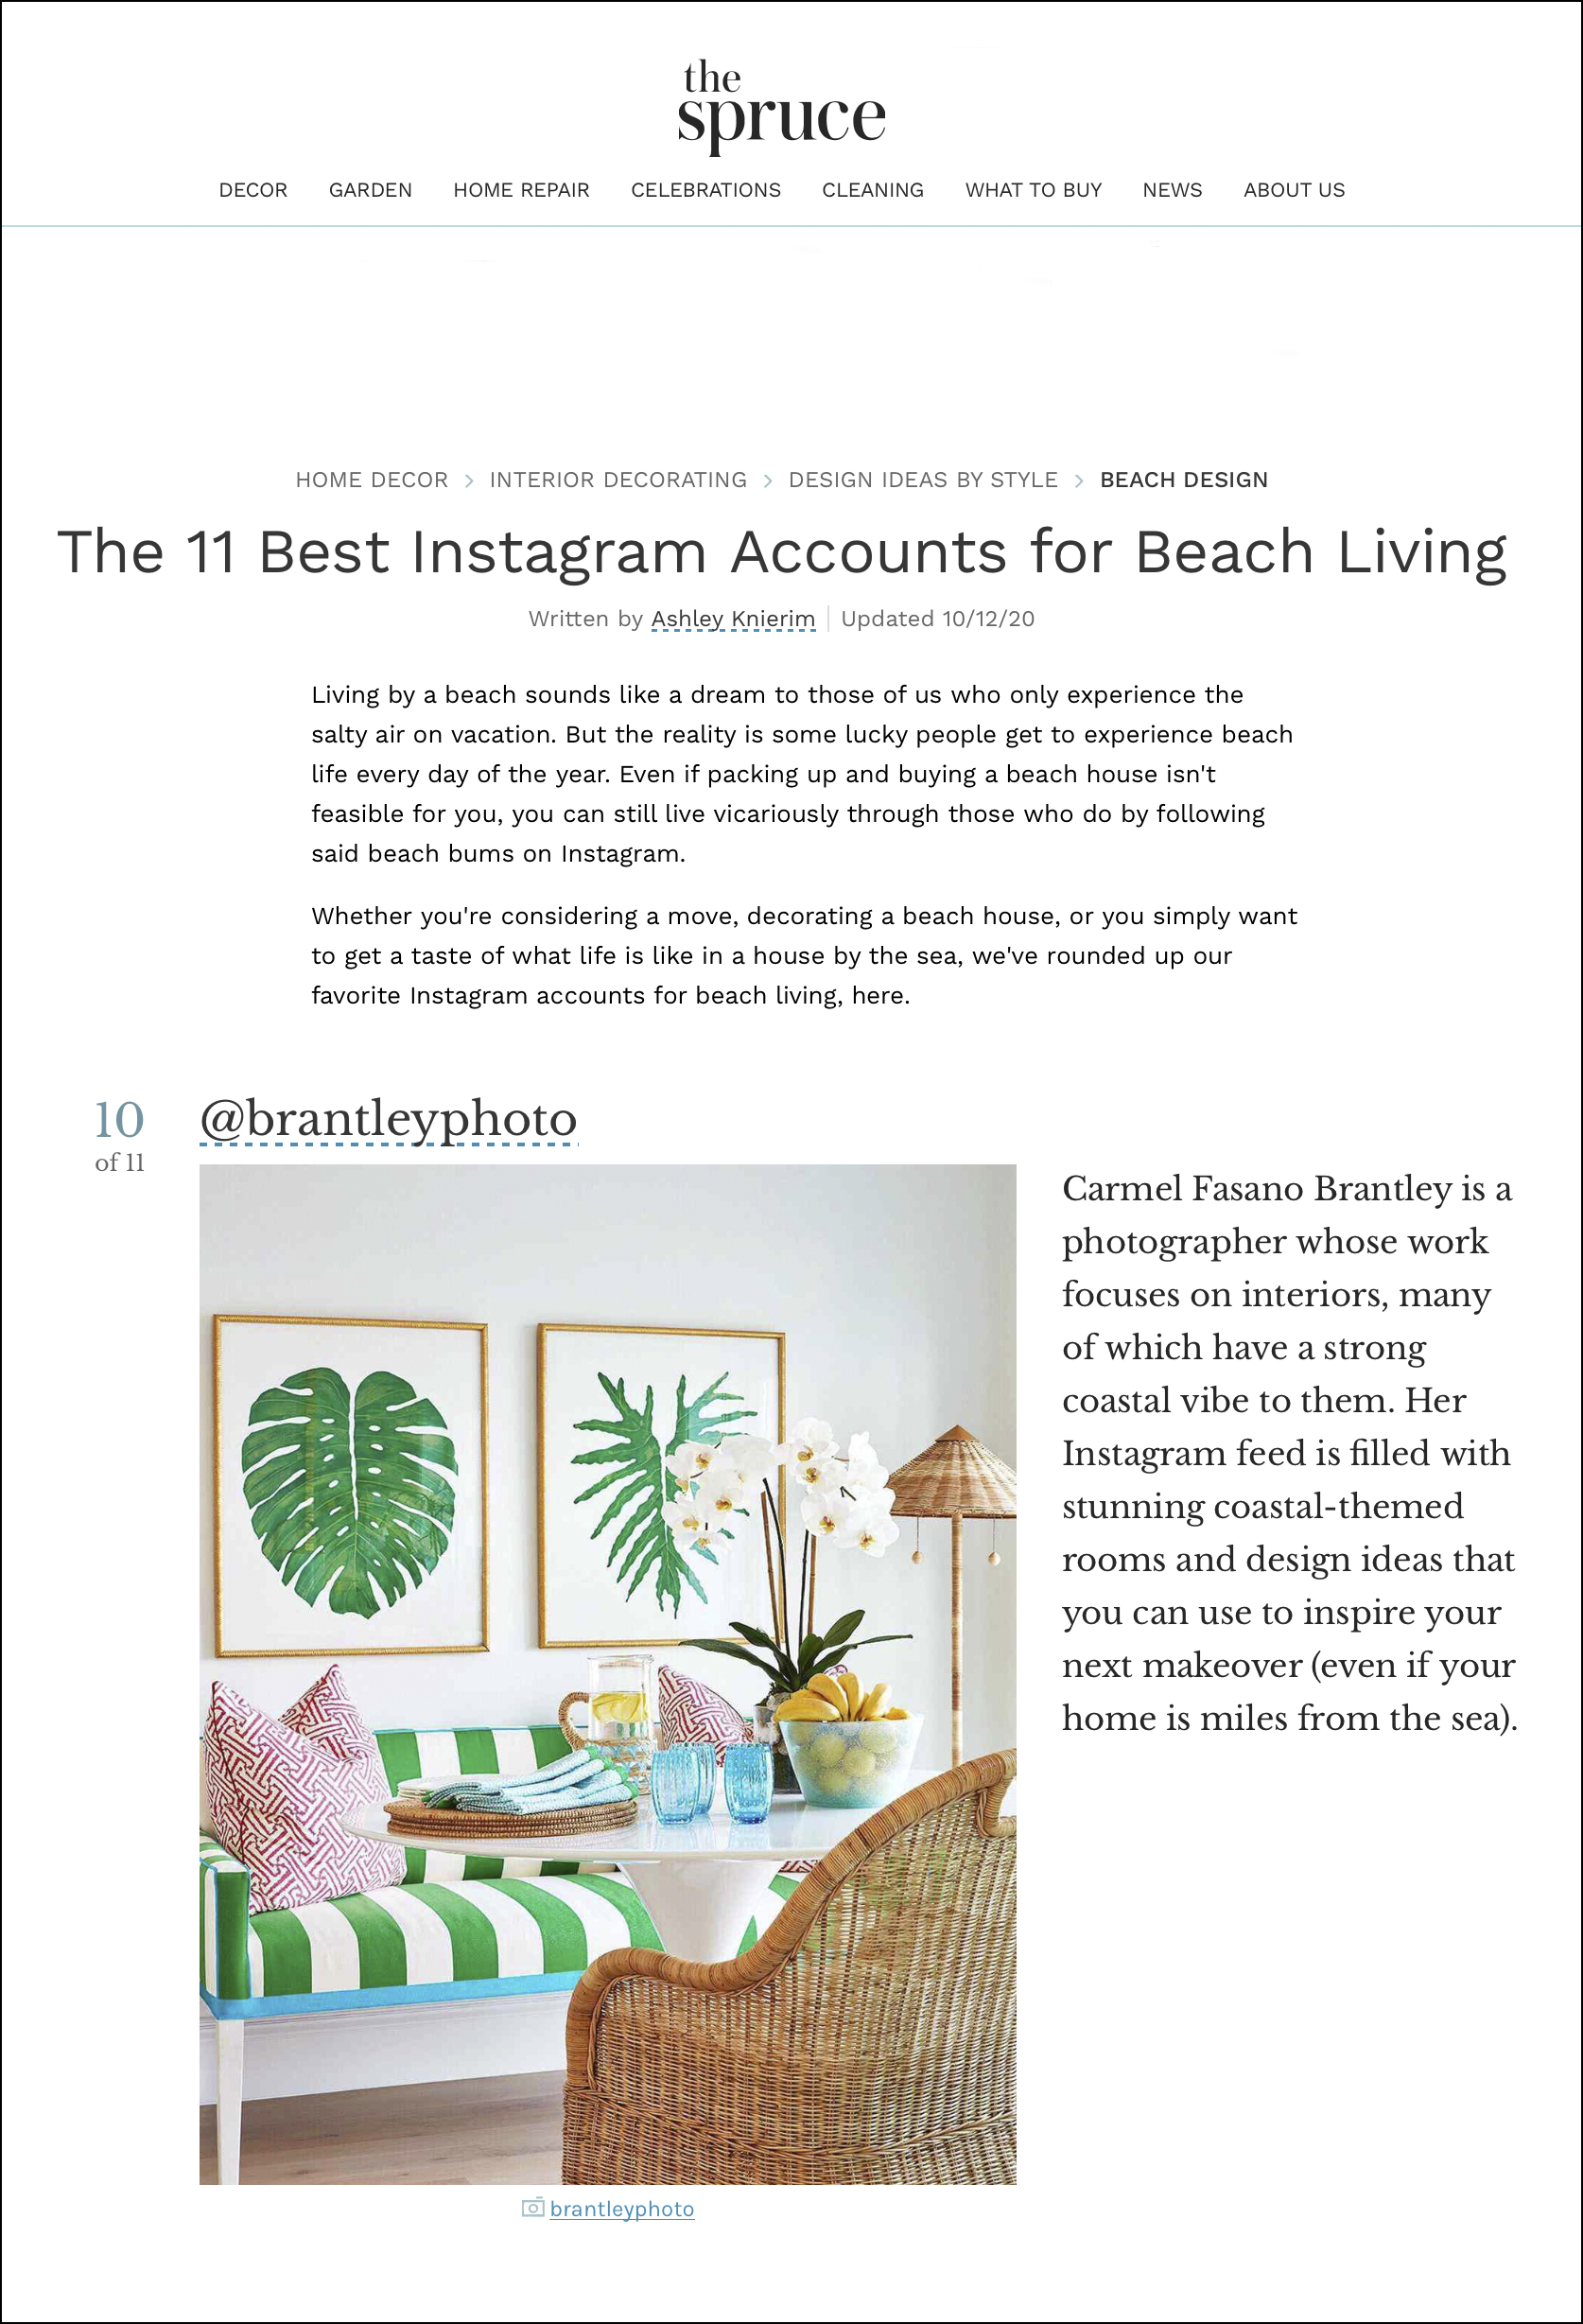 The Spruce Instagram Guide